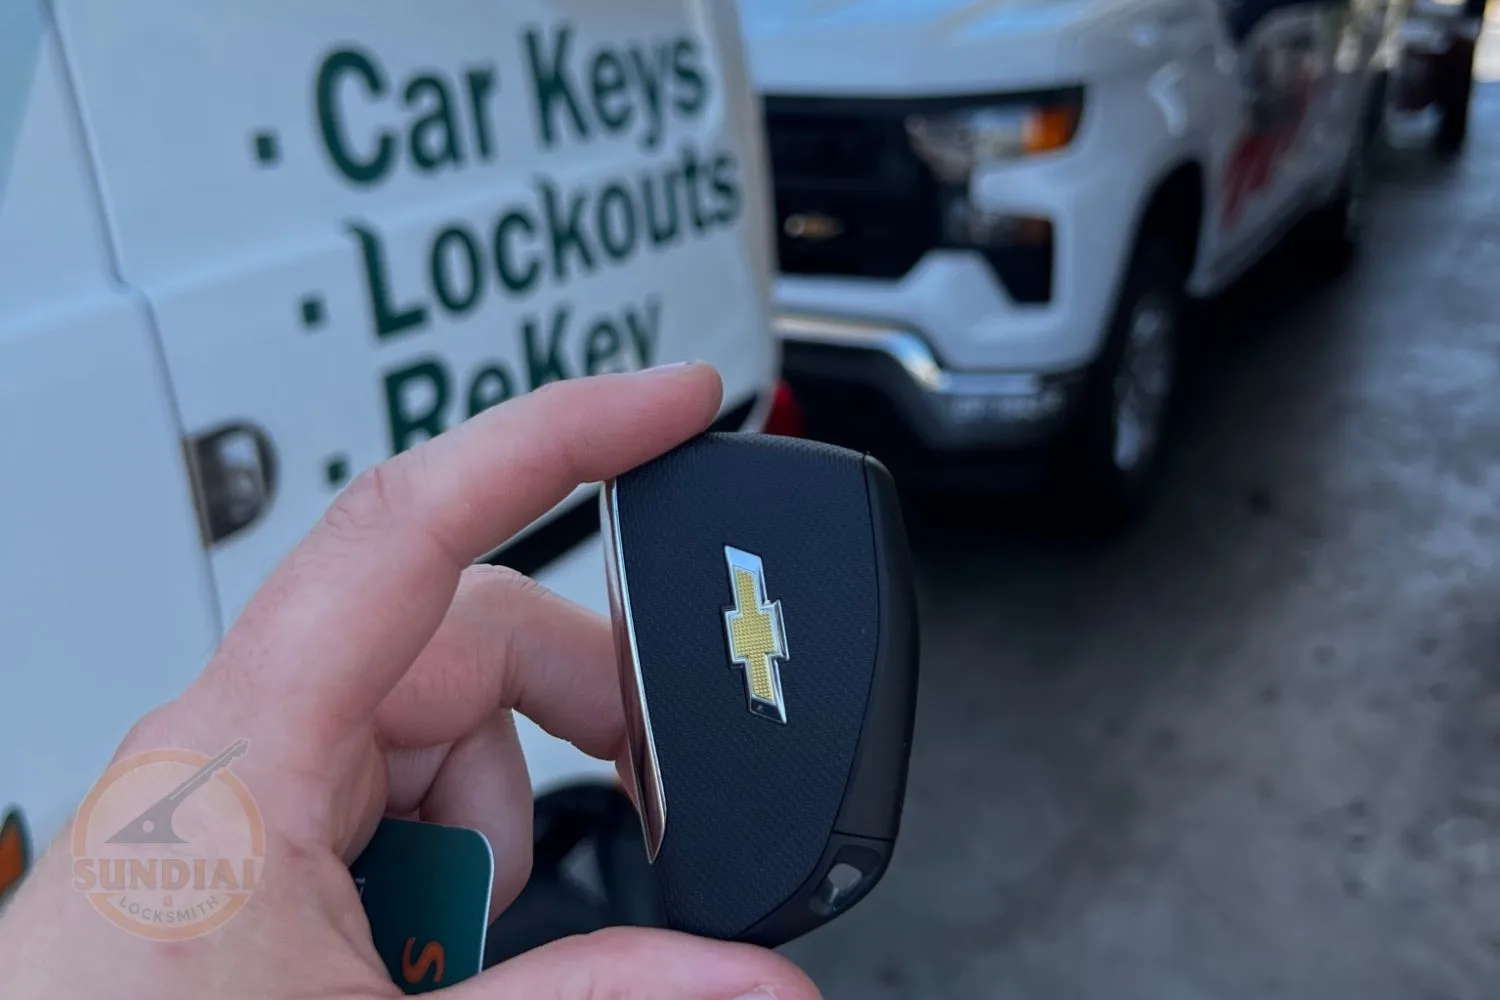 Close-up of a hand holding a Chevrolet car key fob with a locksmith business card, with a service van in the background.